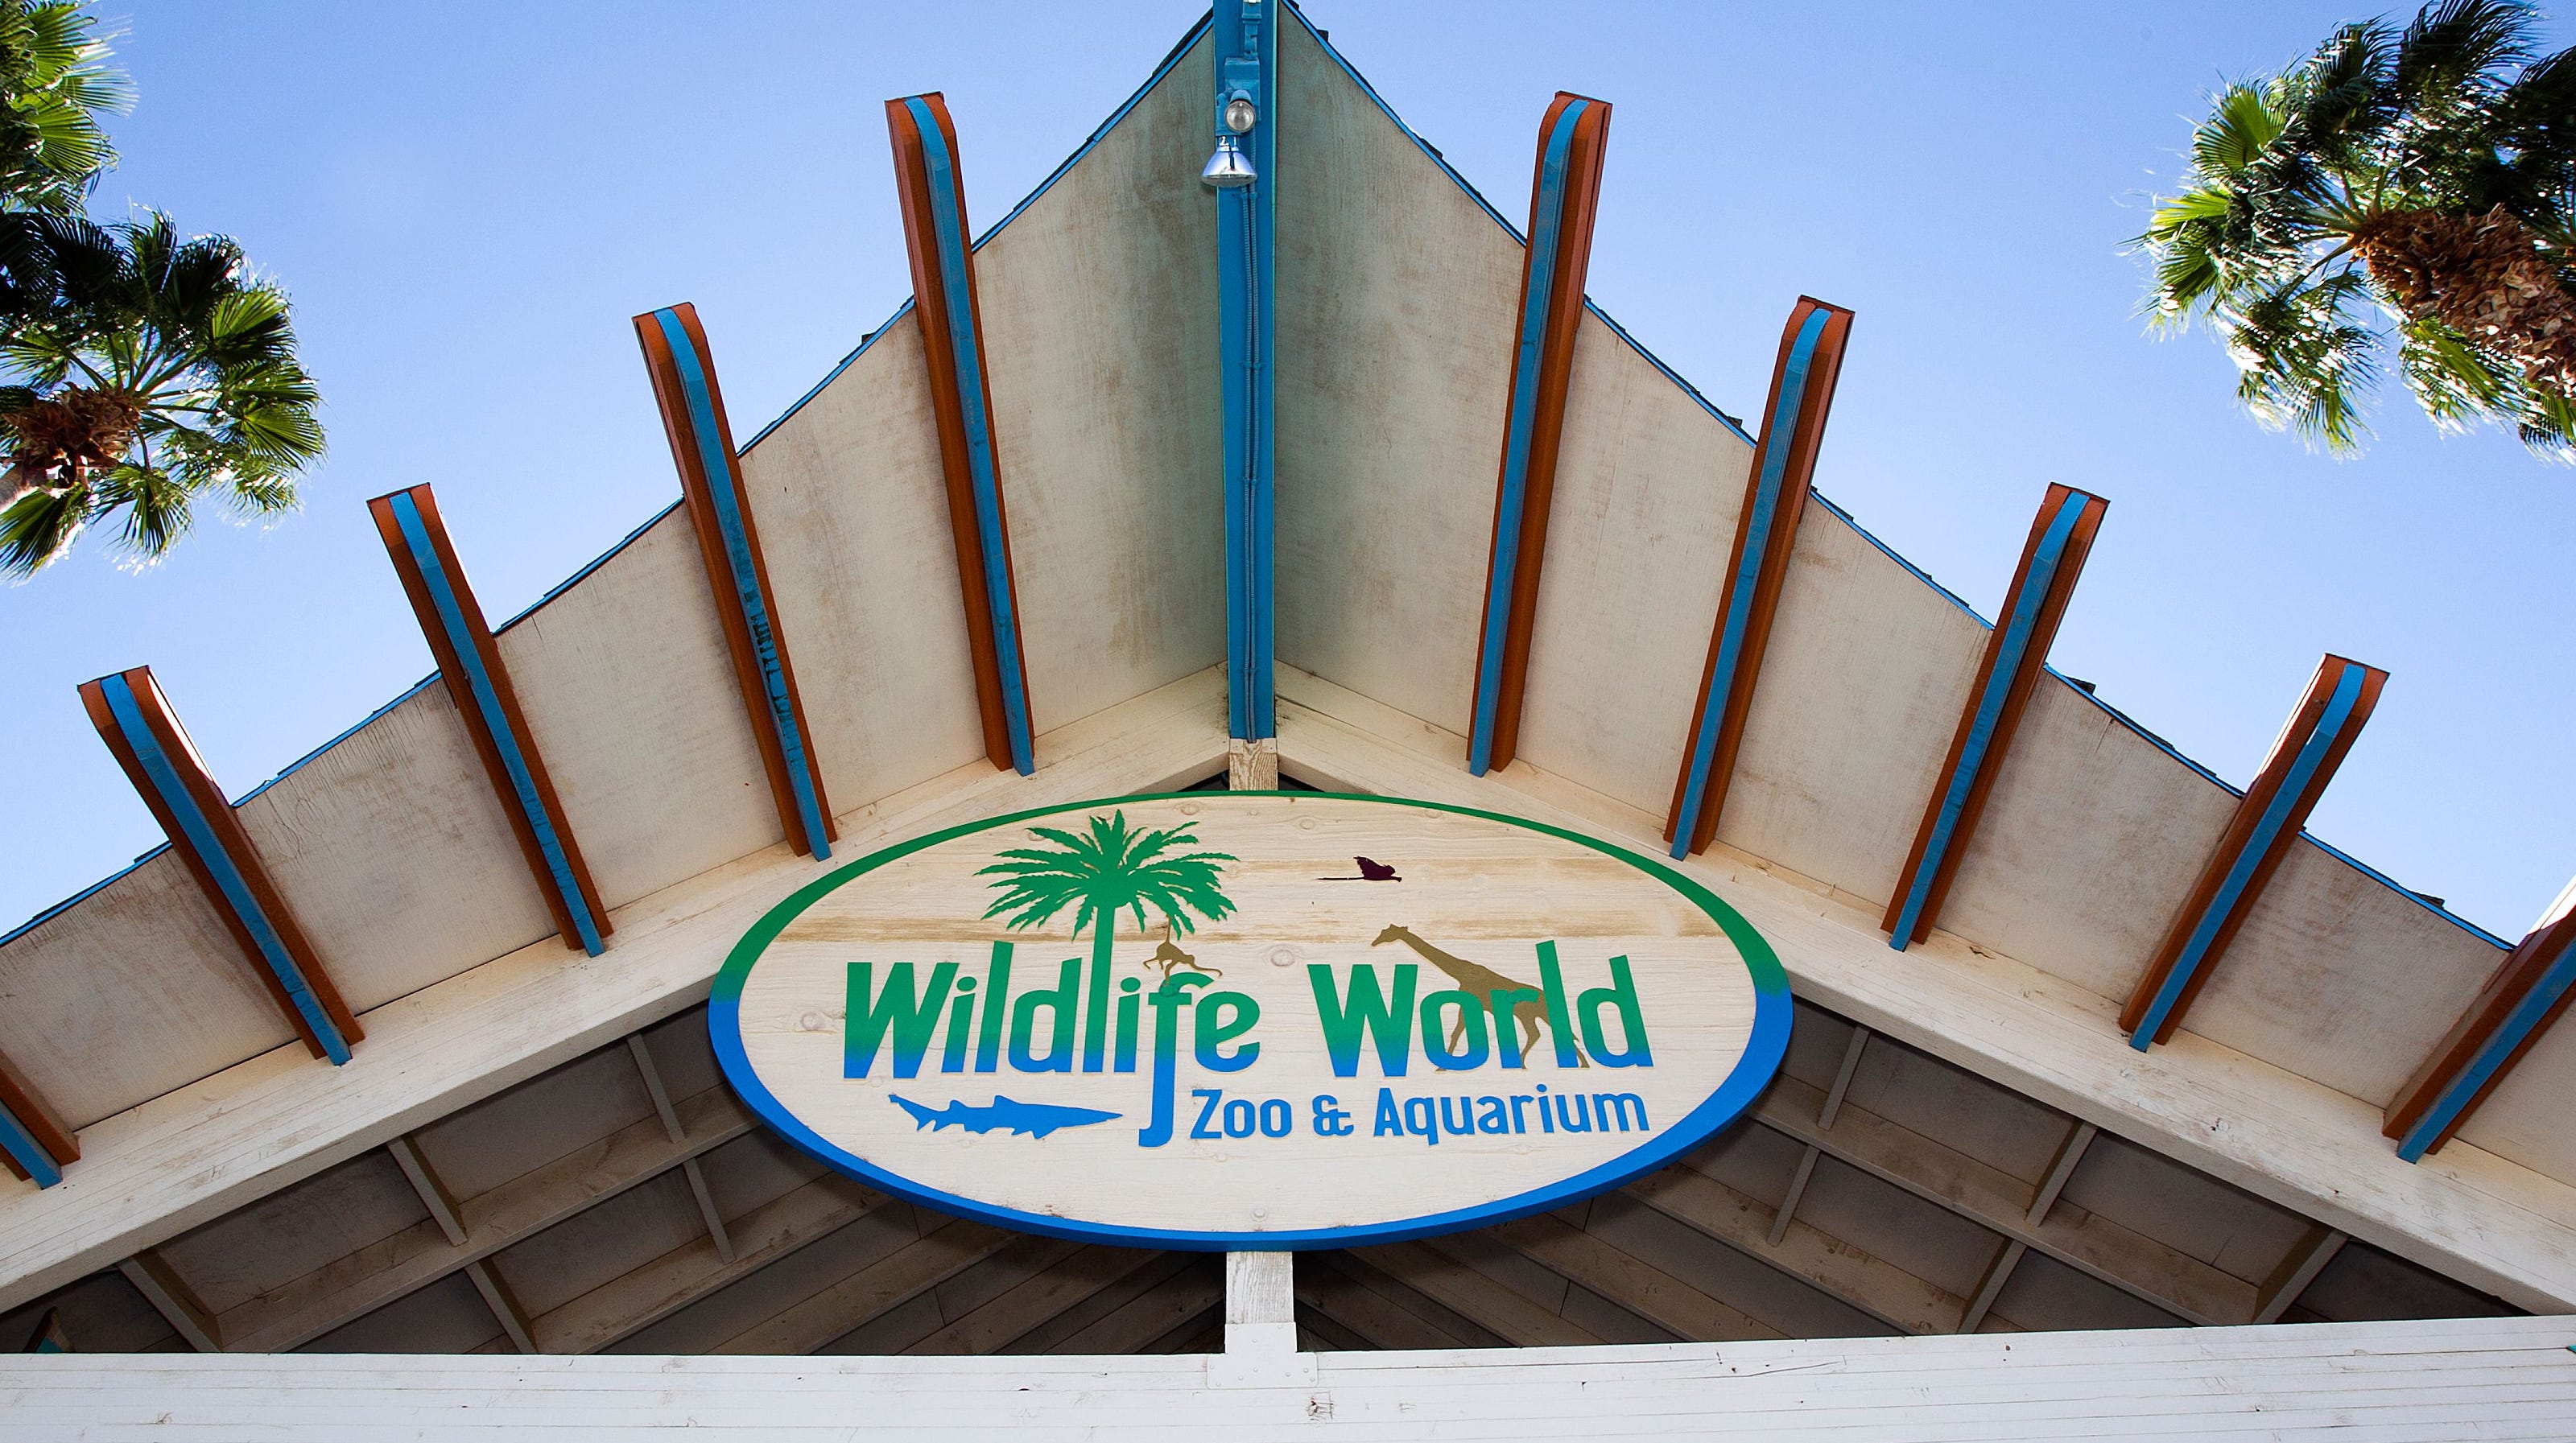 Wildlife World Zoo 'did everything right' after attack, official says